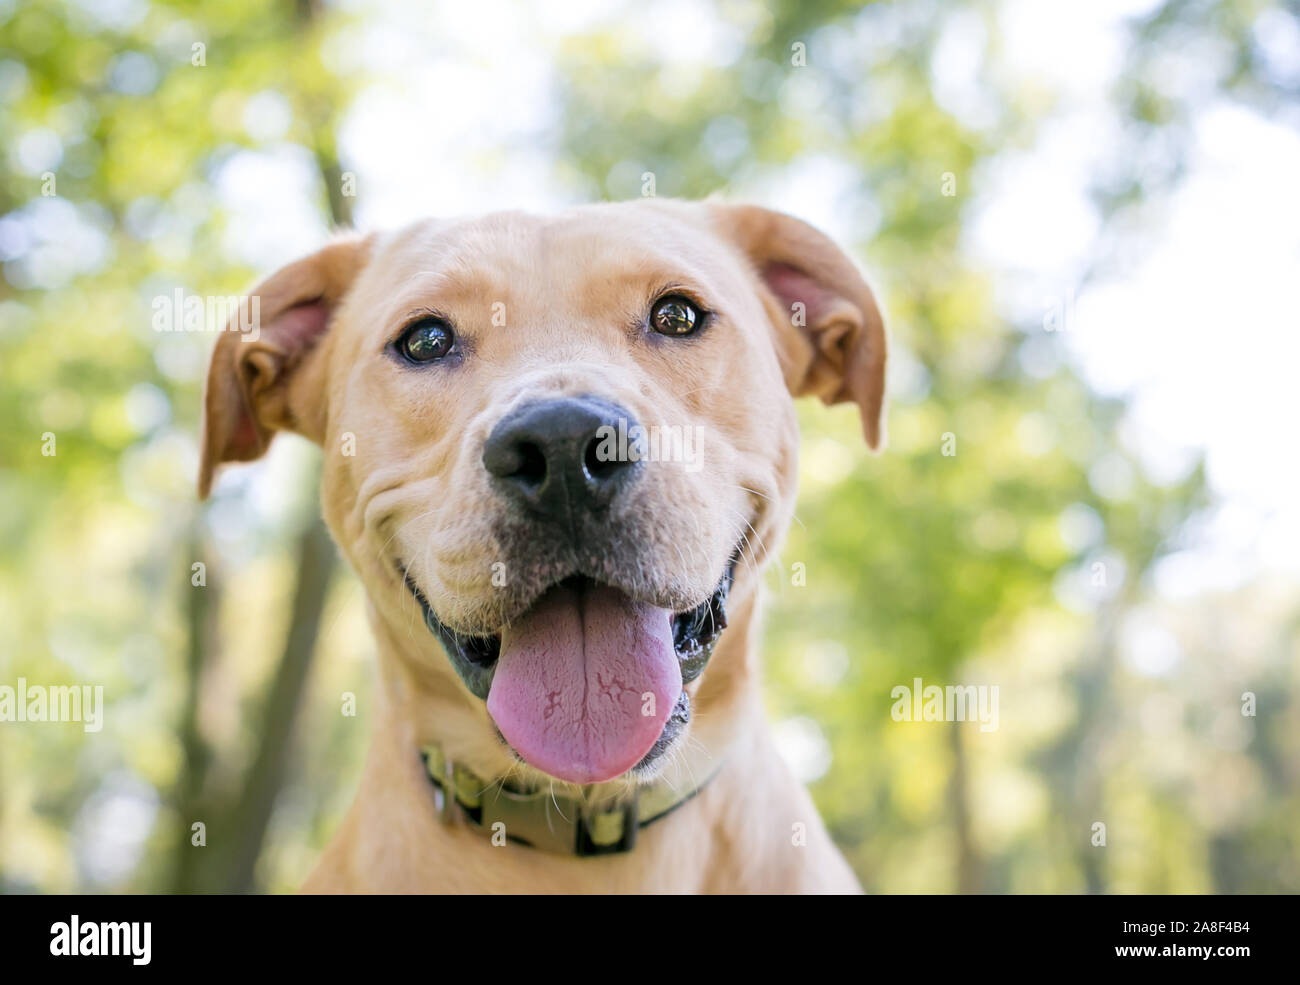 A yellow Labrador Retriever mixed breed dog with a happy expression Stock Photo